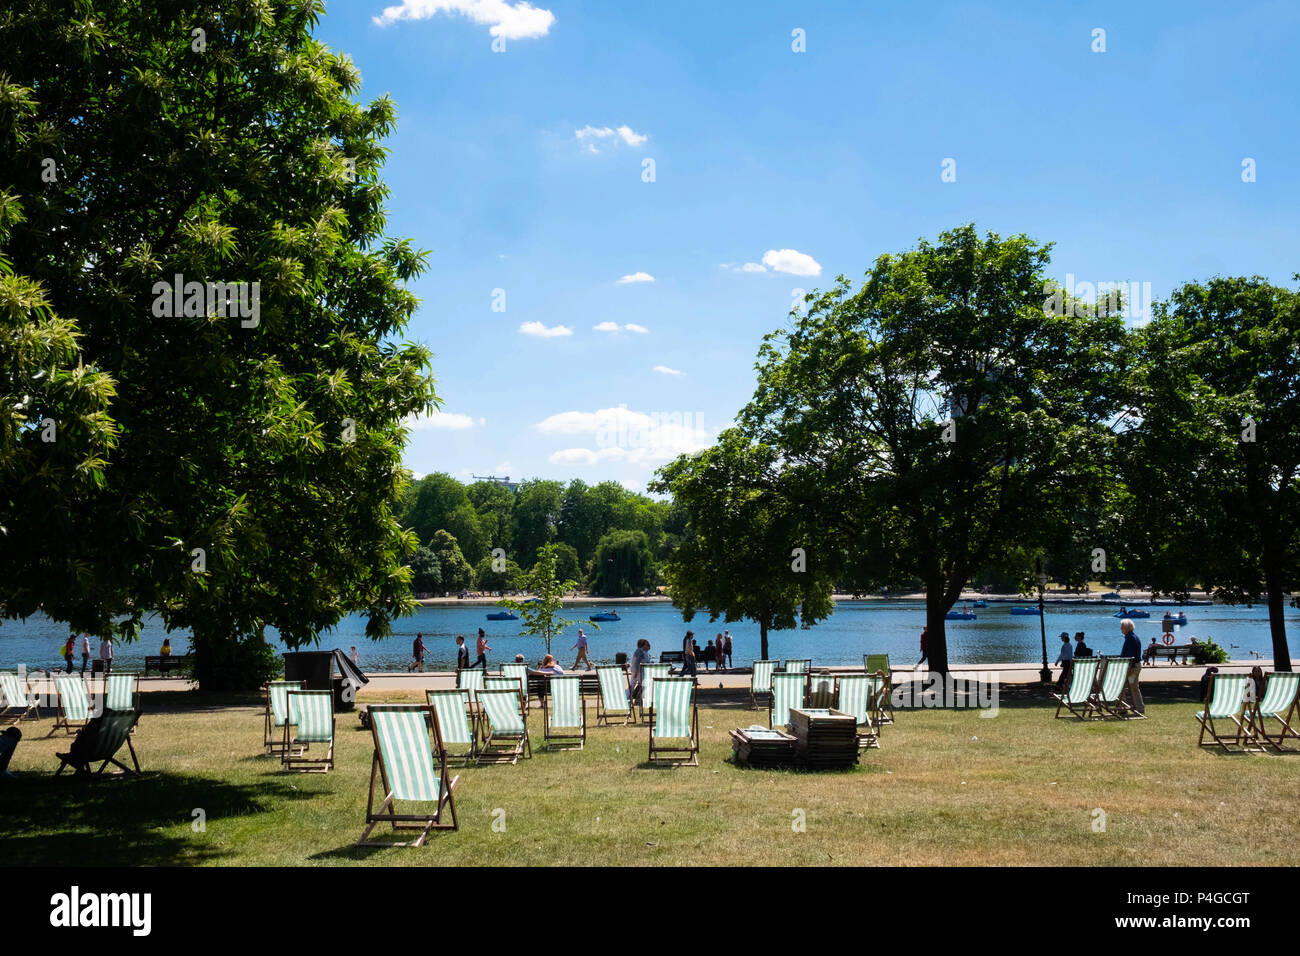 London, England. 22nd June 2018. The deckchairs are out in Hyde Park. This sunny weather is said to continue for the next few days. ©Tim Ring/Alamy Live News Stock Photo